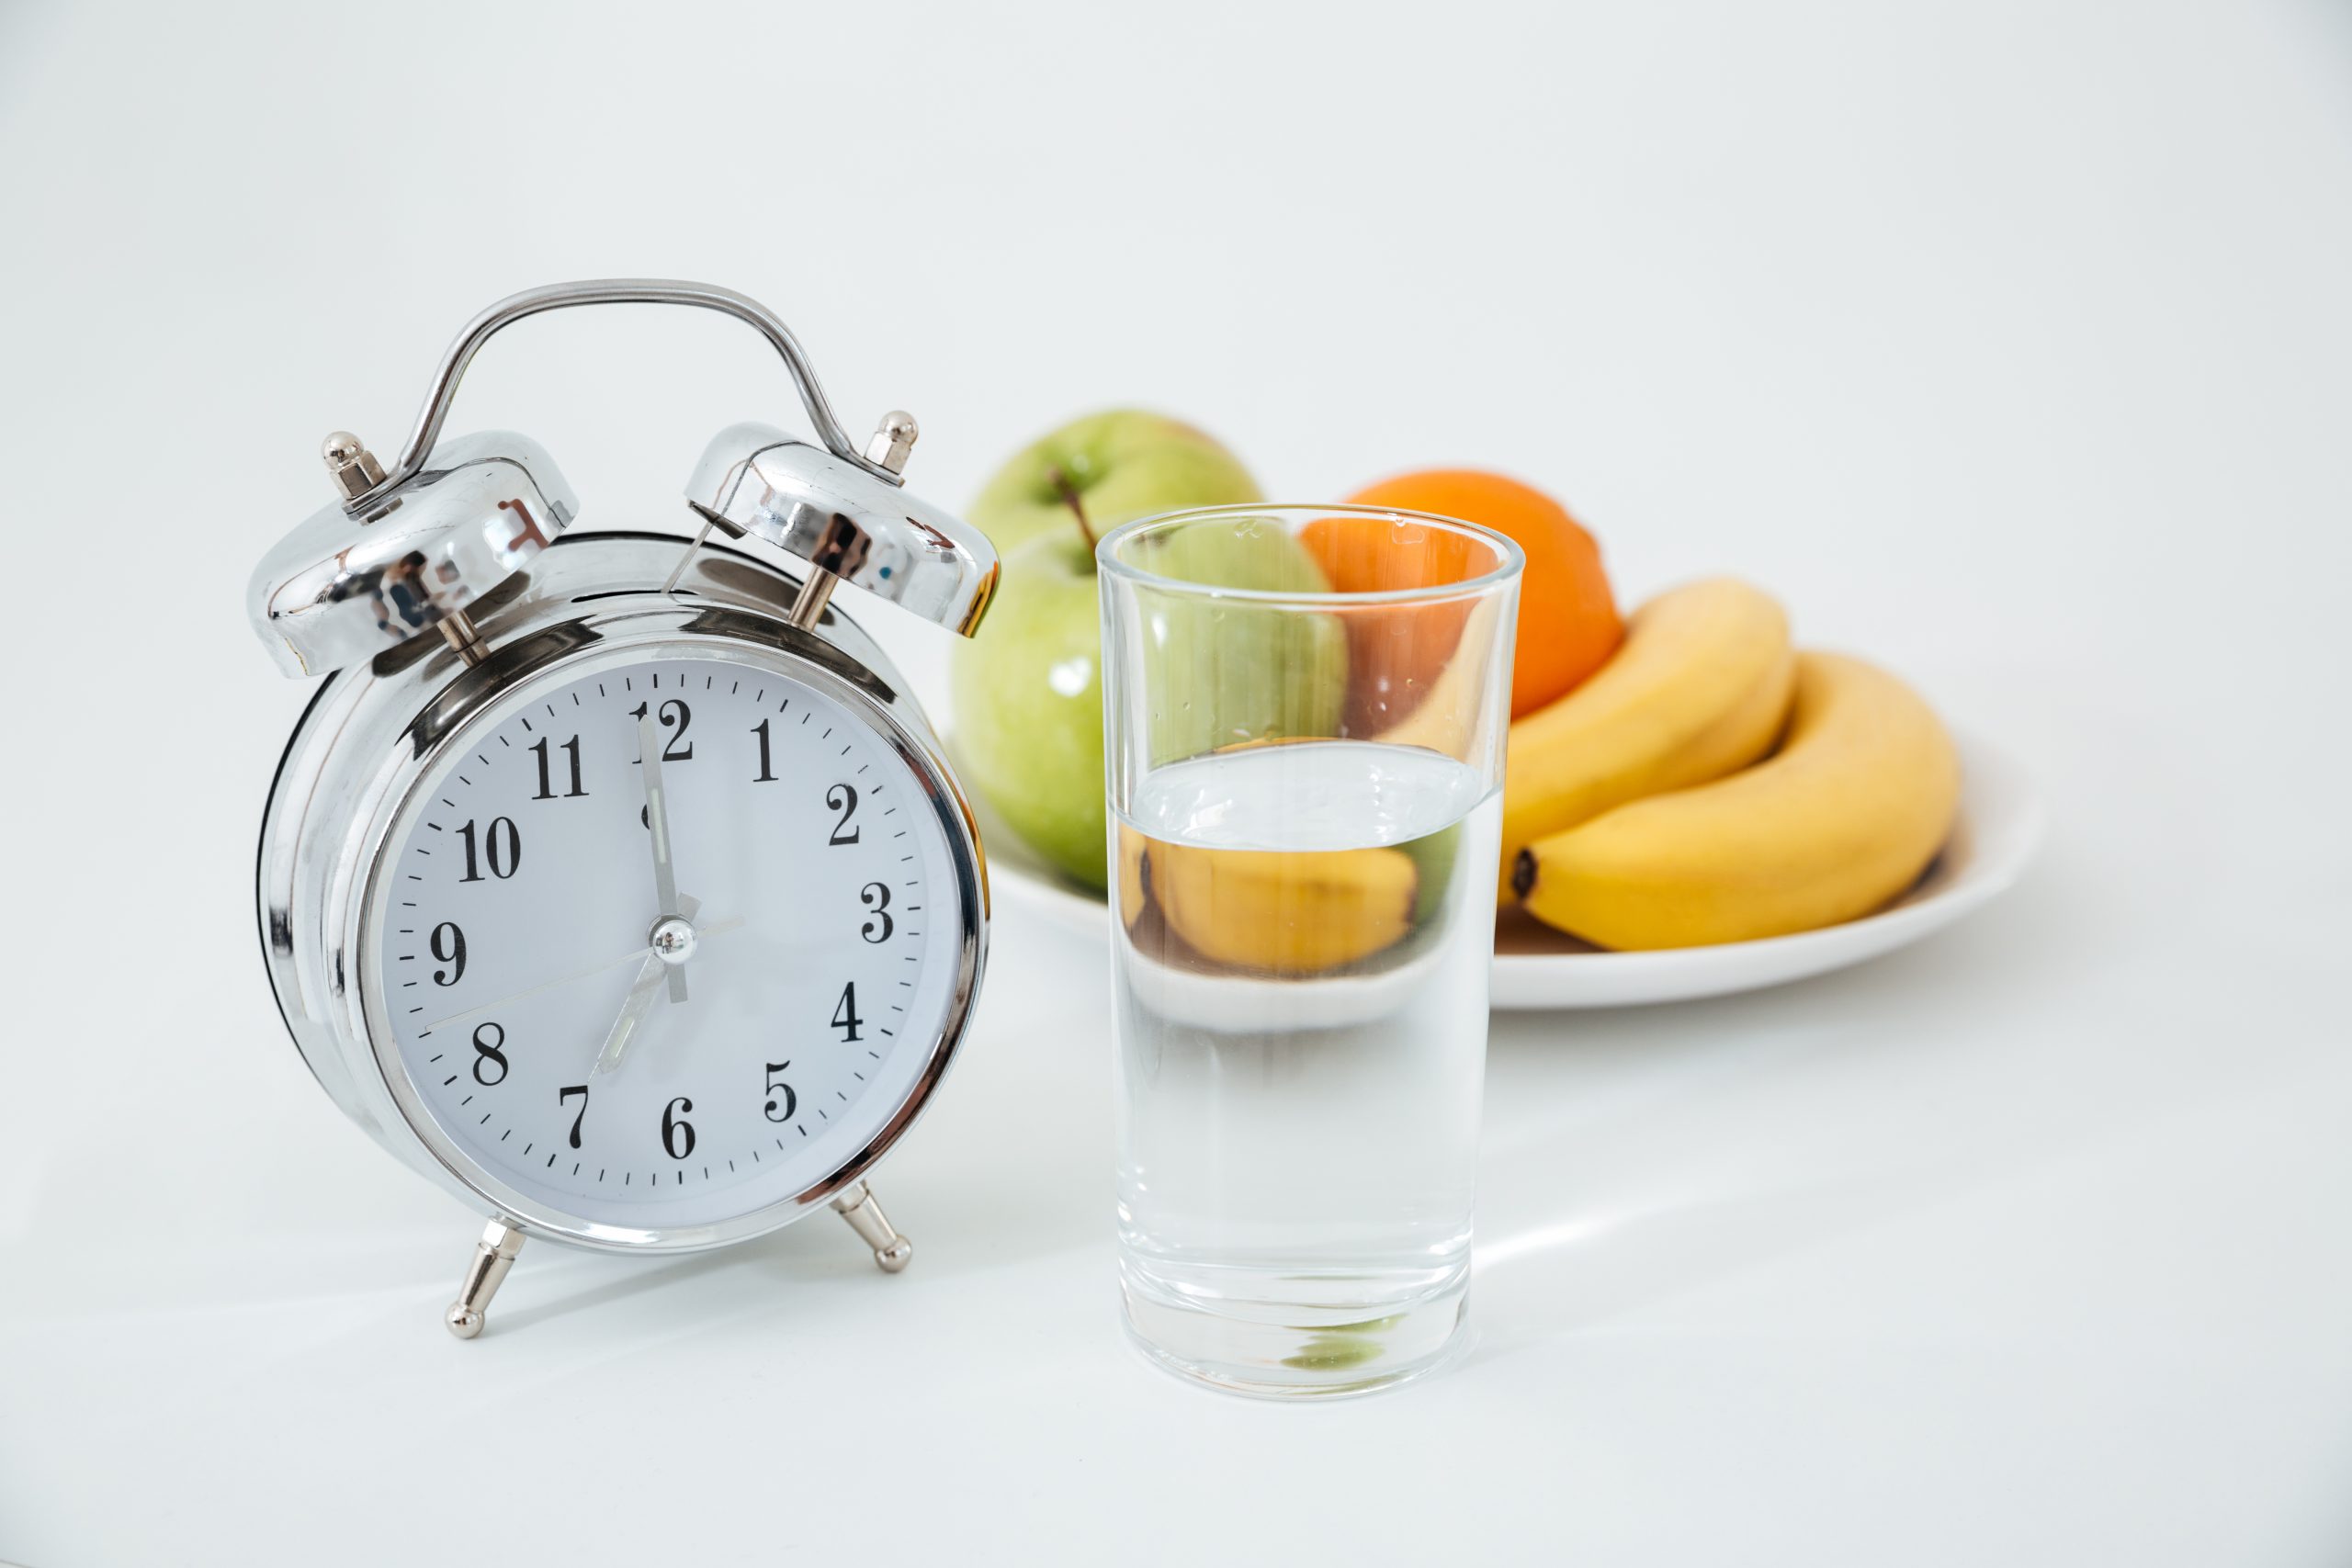 Alarm and glass of water near fruits